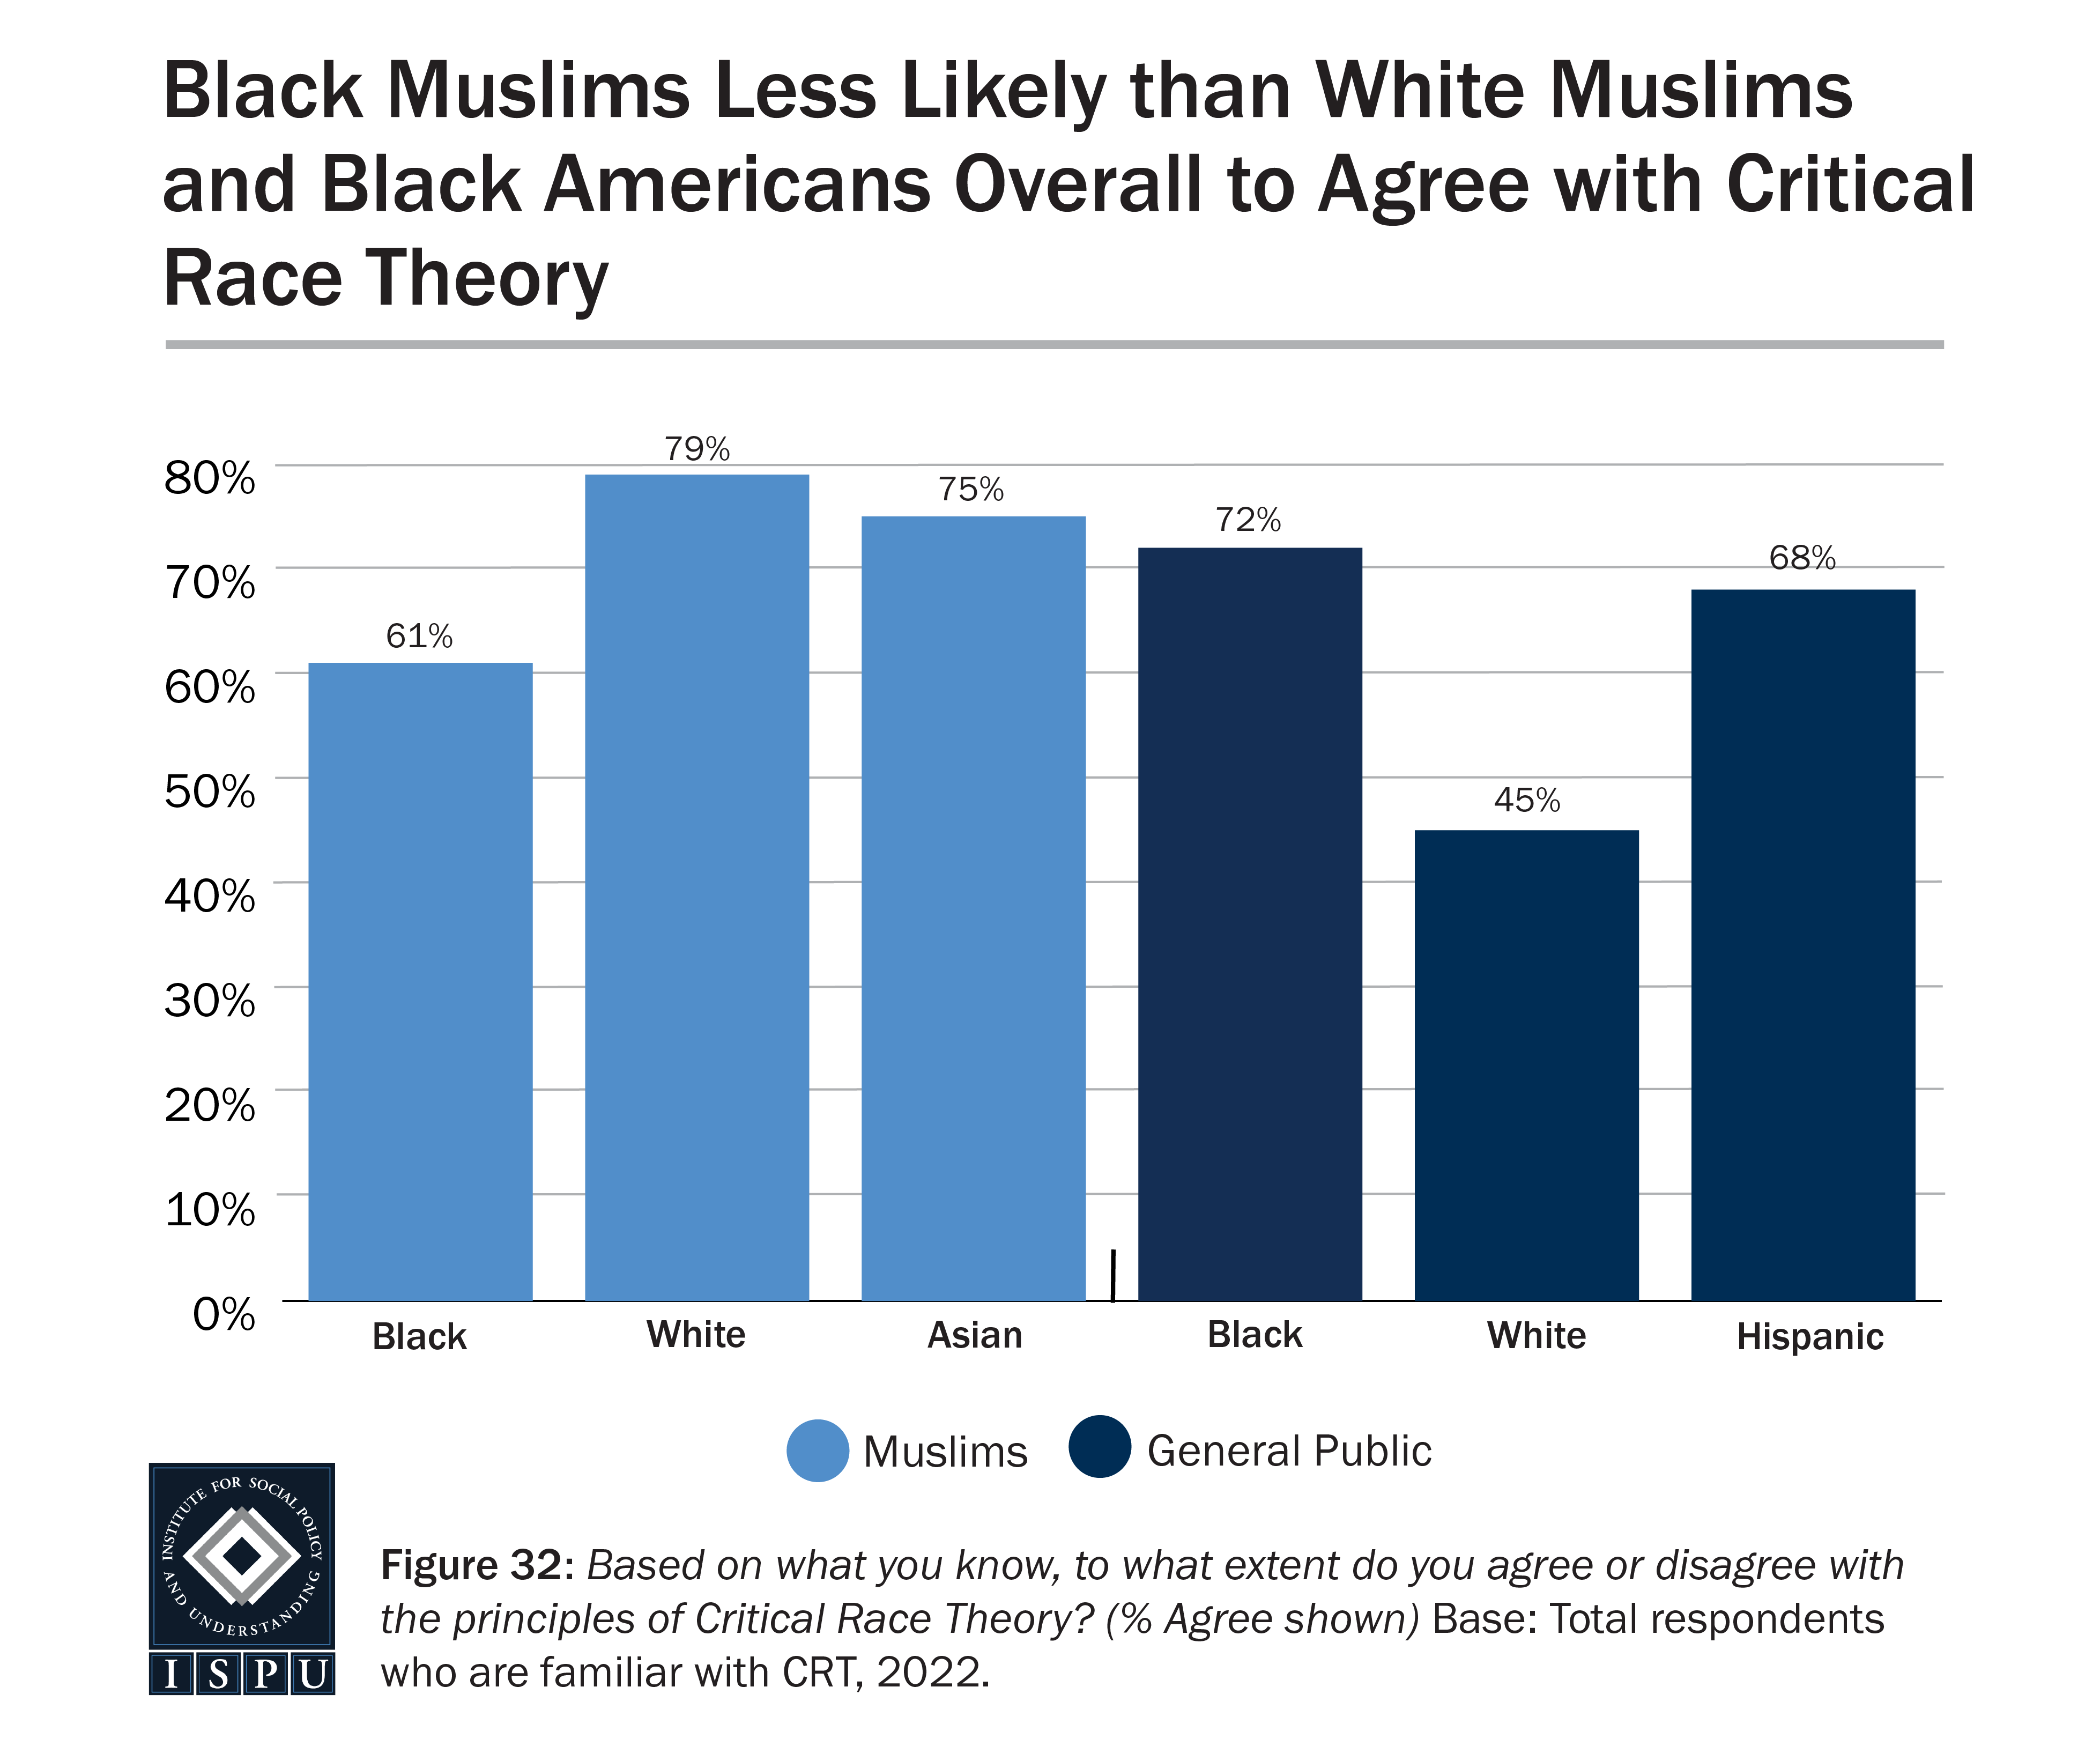 A bar graph showing agreement with the principles of Critical Race Theory among those in the Muslim community and the general public who report being familiar with it.